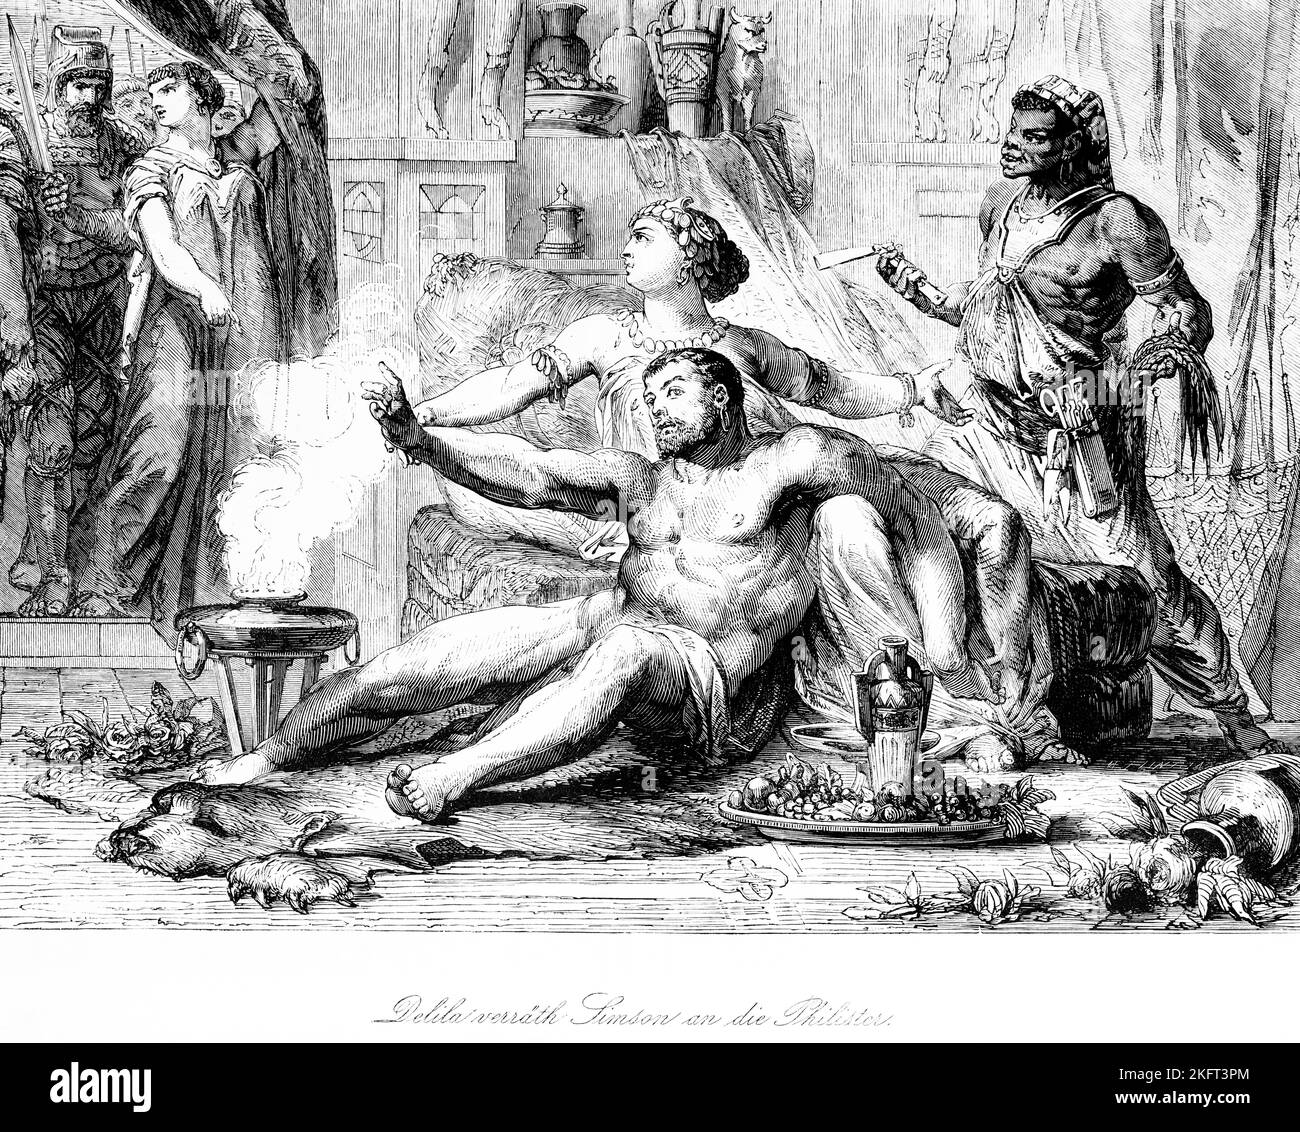 Delilah betrays Samson to the Philistines, interior, wealth, ornamentation, sit, show, betray, stand, smoke, fruit, bowl, tool, warrior, sword, hide, Stock Photo